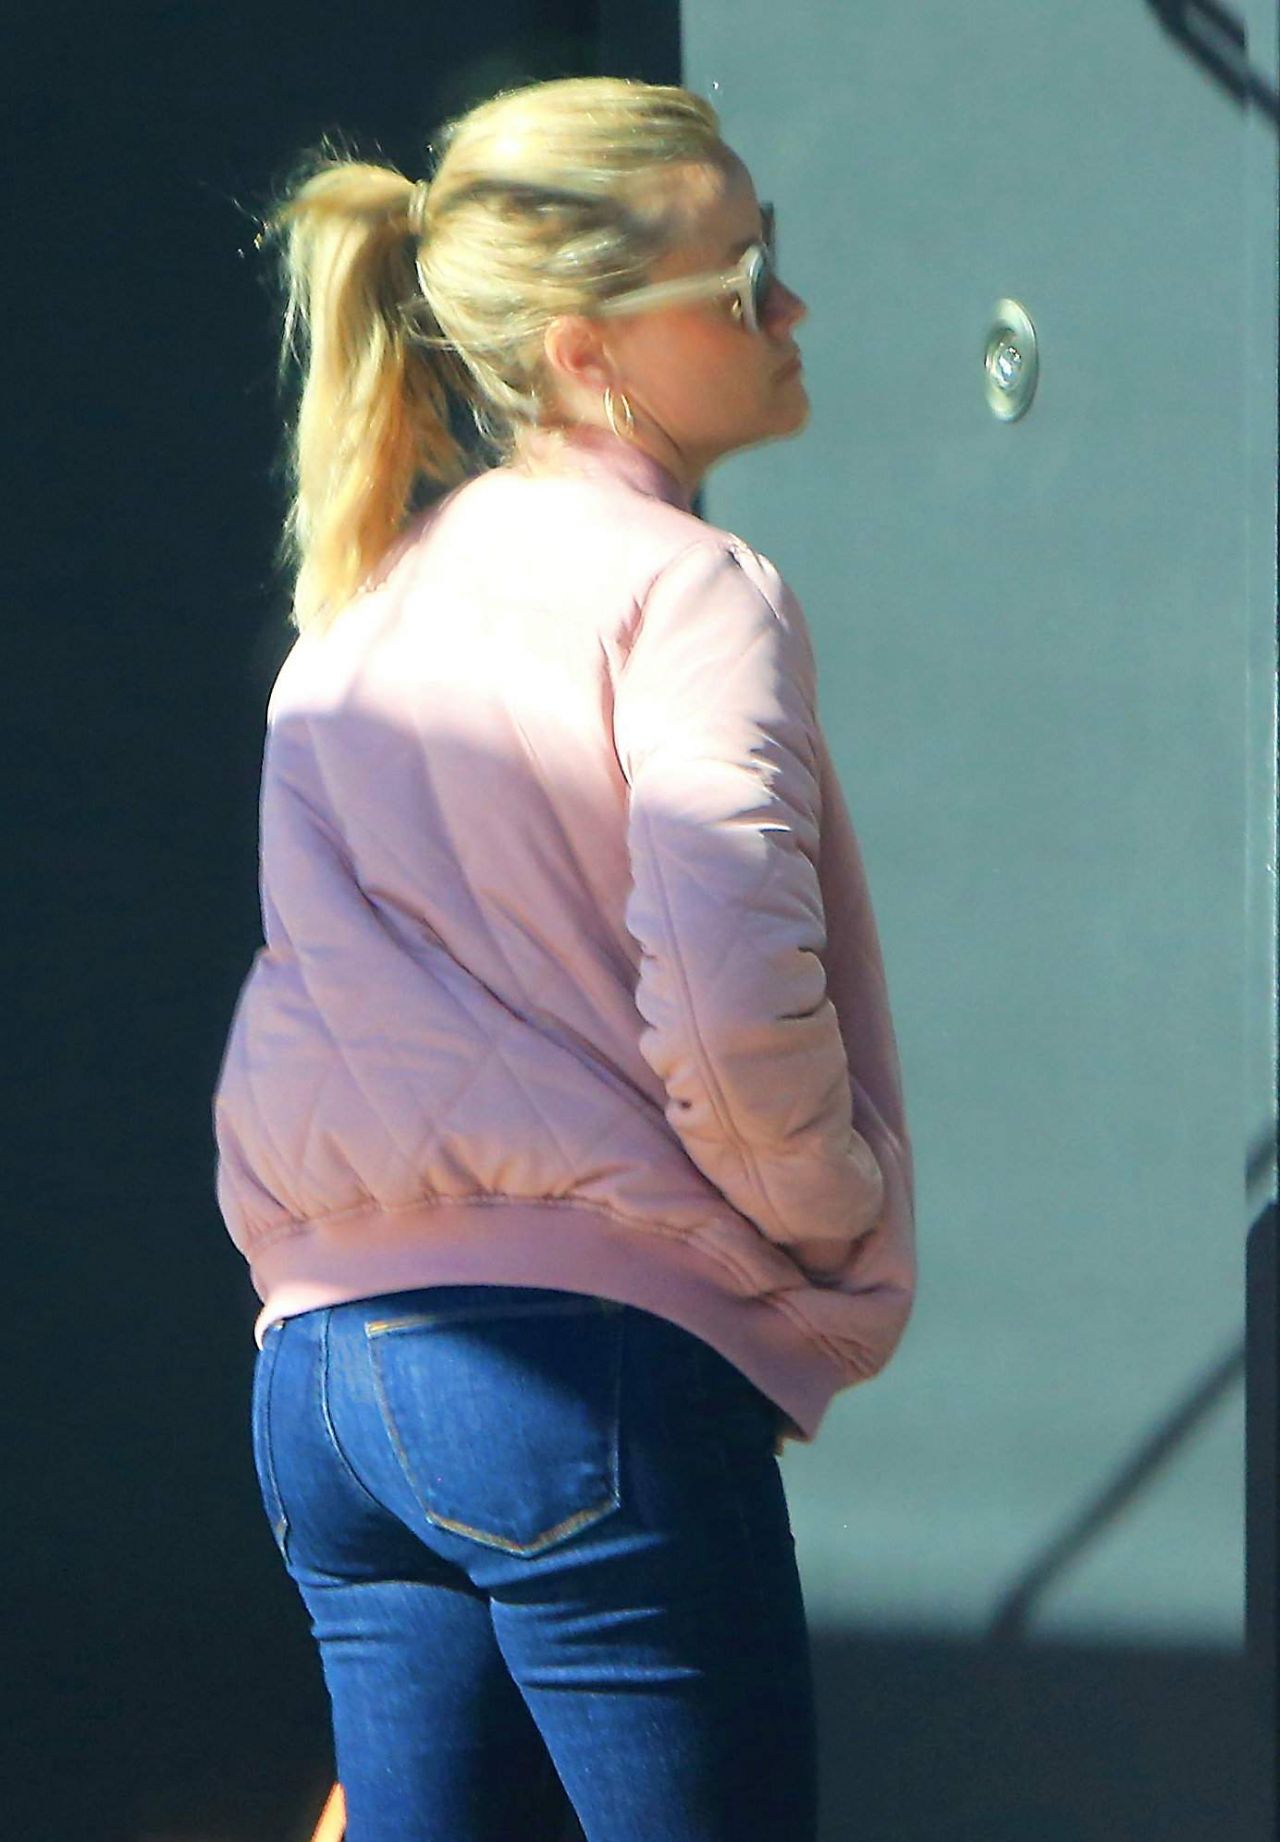 Reese Witherspoon Booty in Jeans - Beverly Hills 02/22/2018.